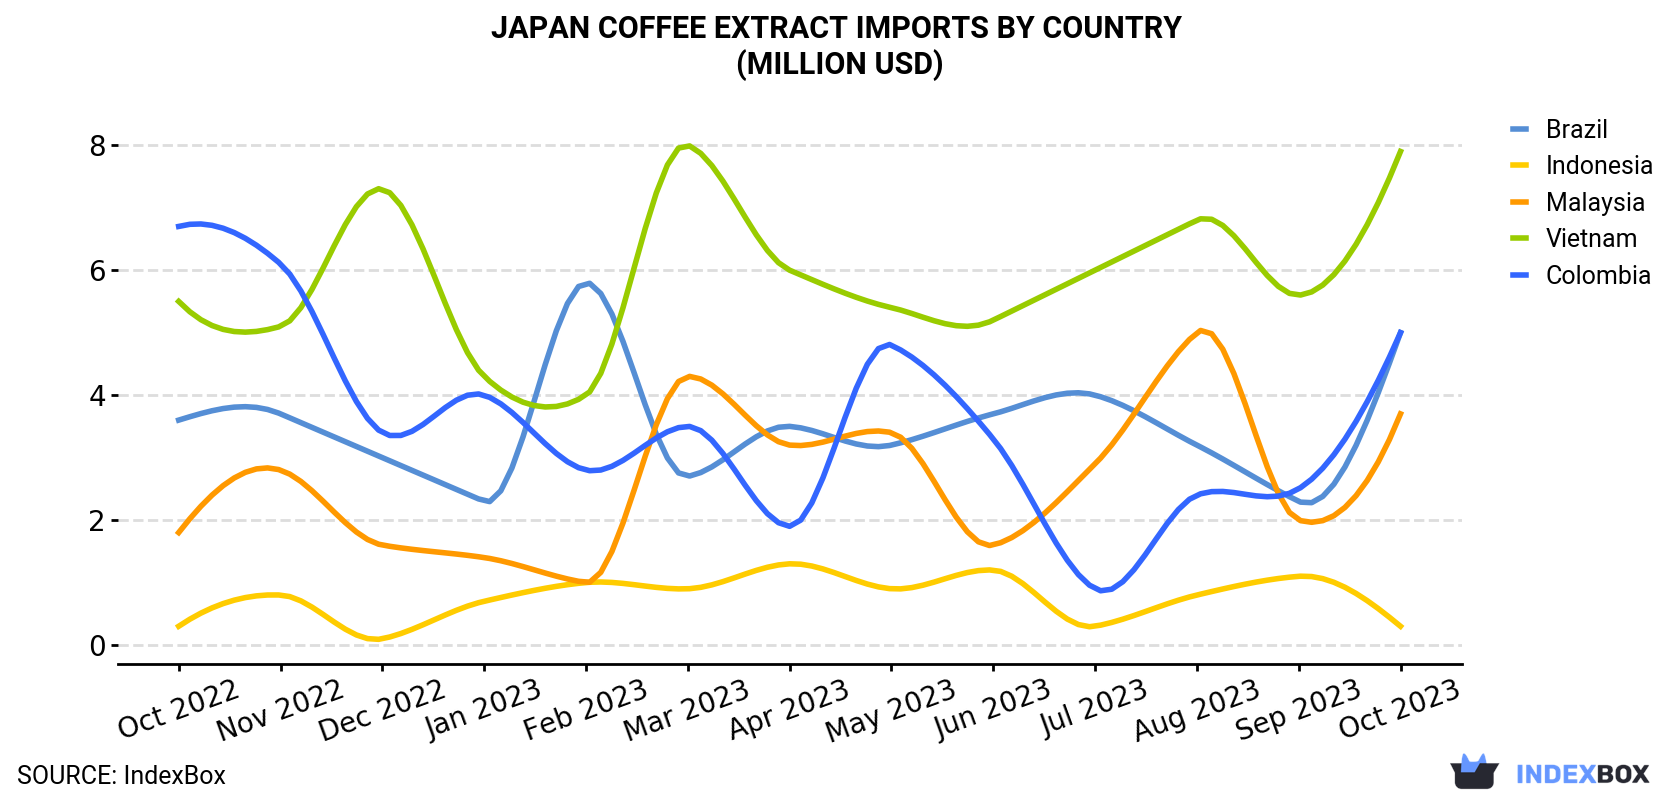 Japan Coffee Extract Imports By Country (Million USD)